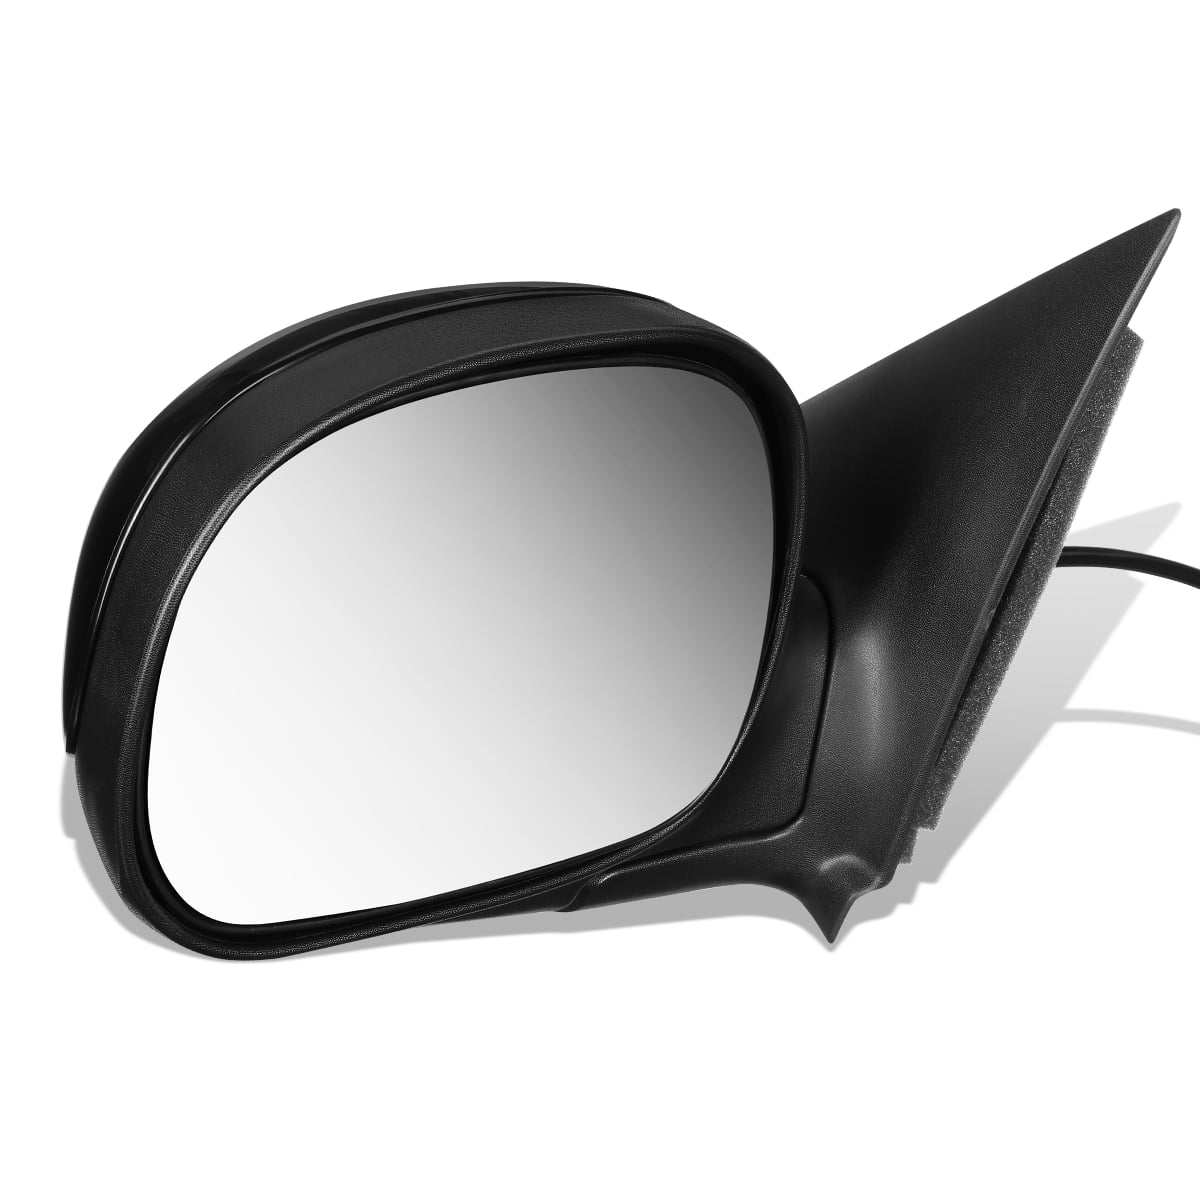 Dorman 955-1660 Chevrolet Equinox Driver Side Power Replacement Side View Mirror 